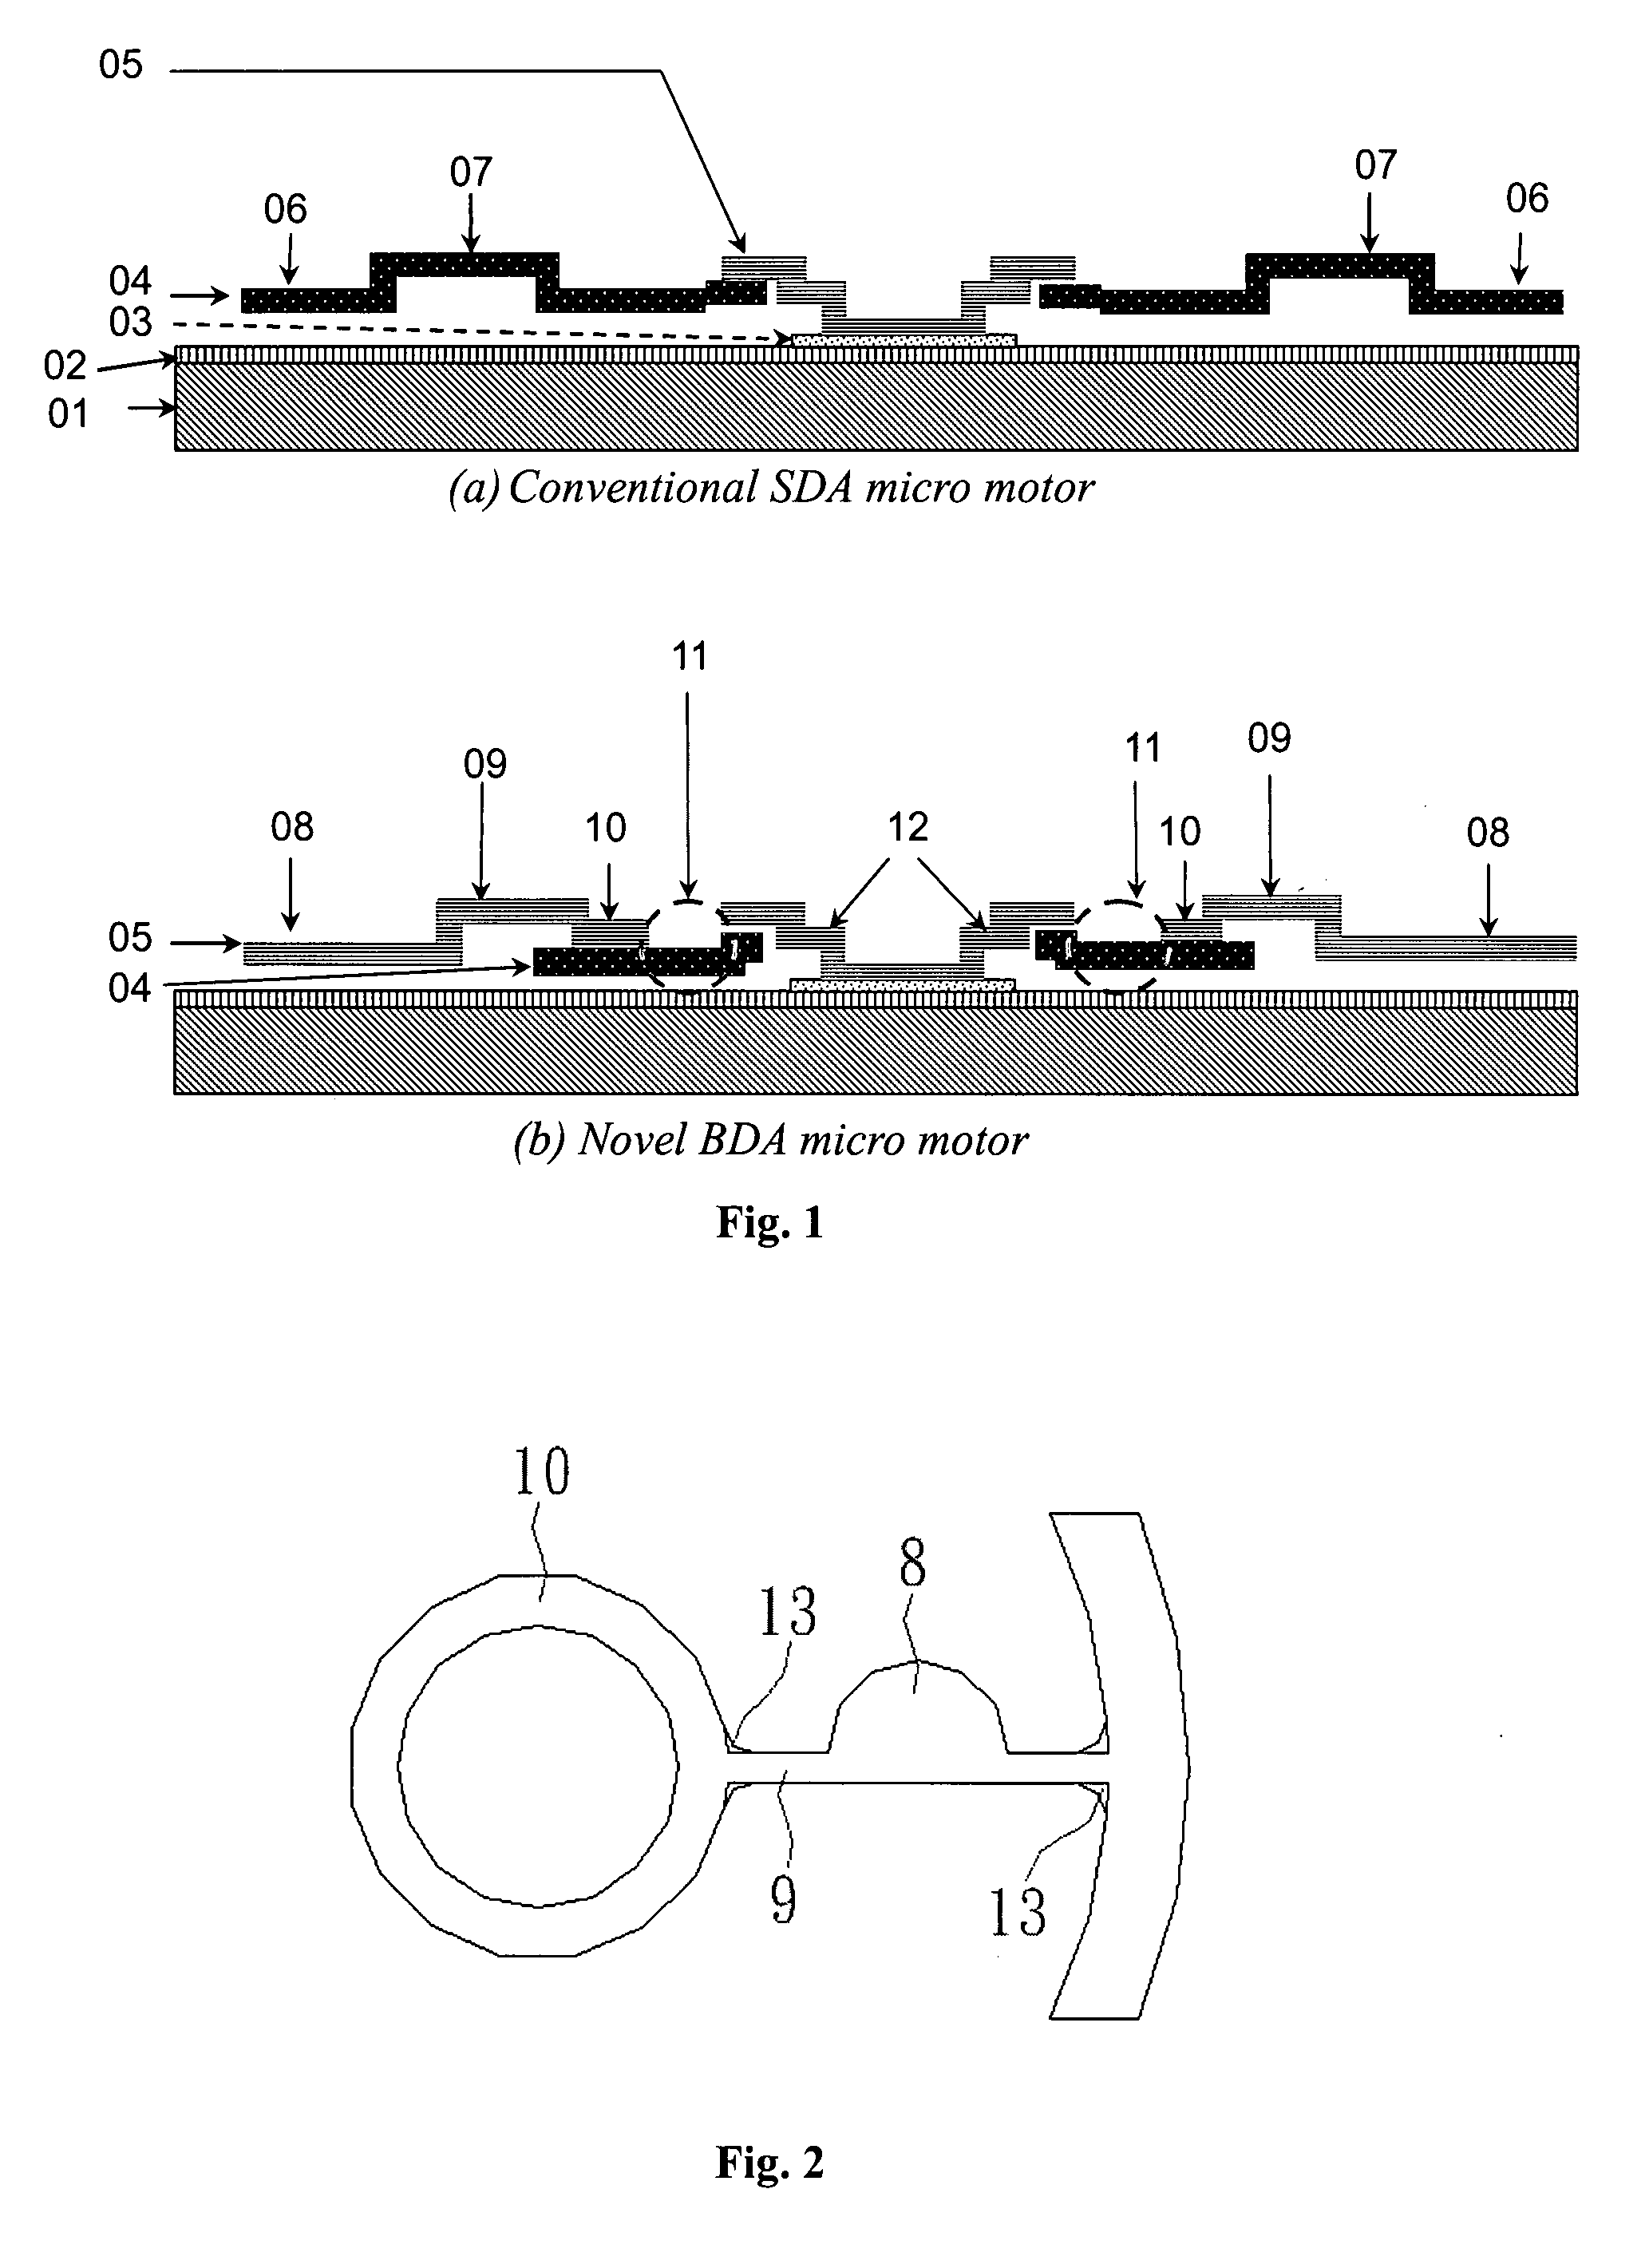 Bounce drive actuator and micromotor